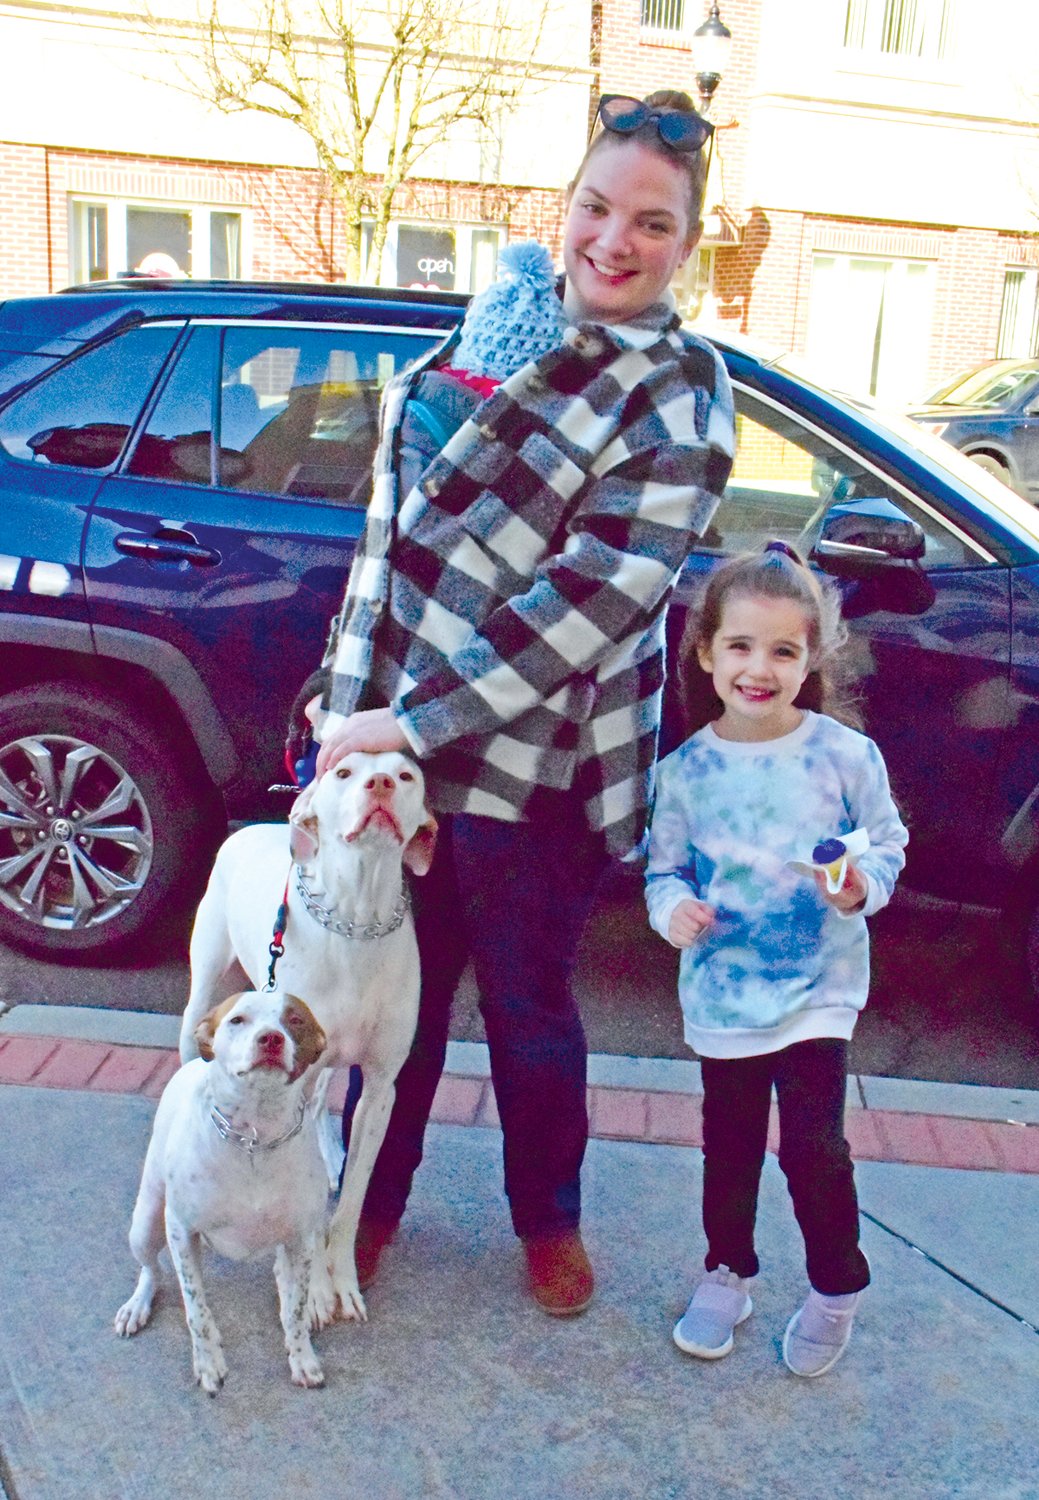 Enjoying the day's festivities on Jan. 28 in downtown Perkasie was Jordan Valente with Lydia and Anna as they walked their dogs Toby and Daisy.